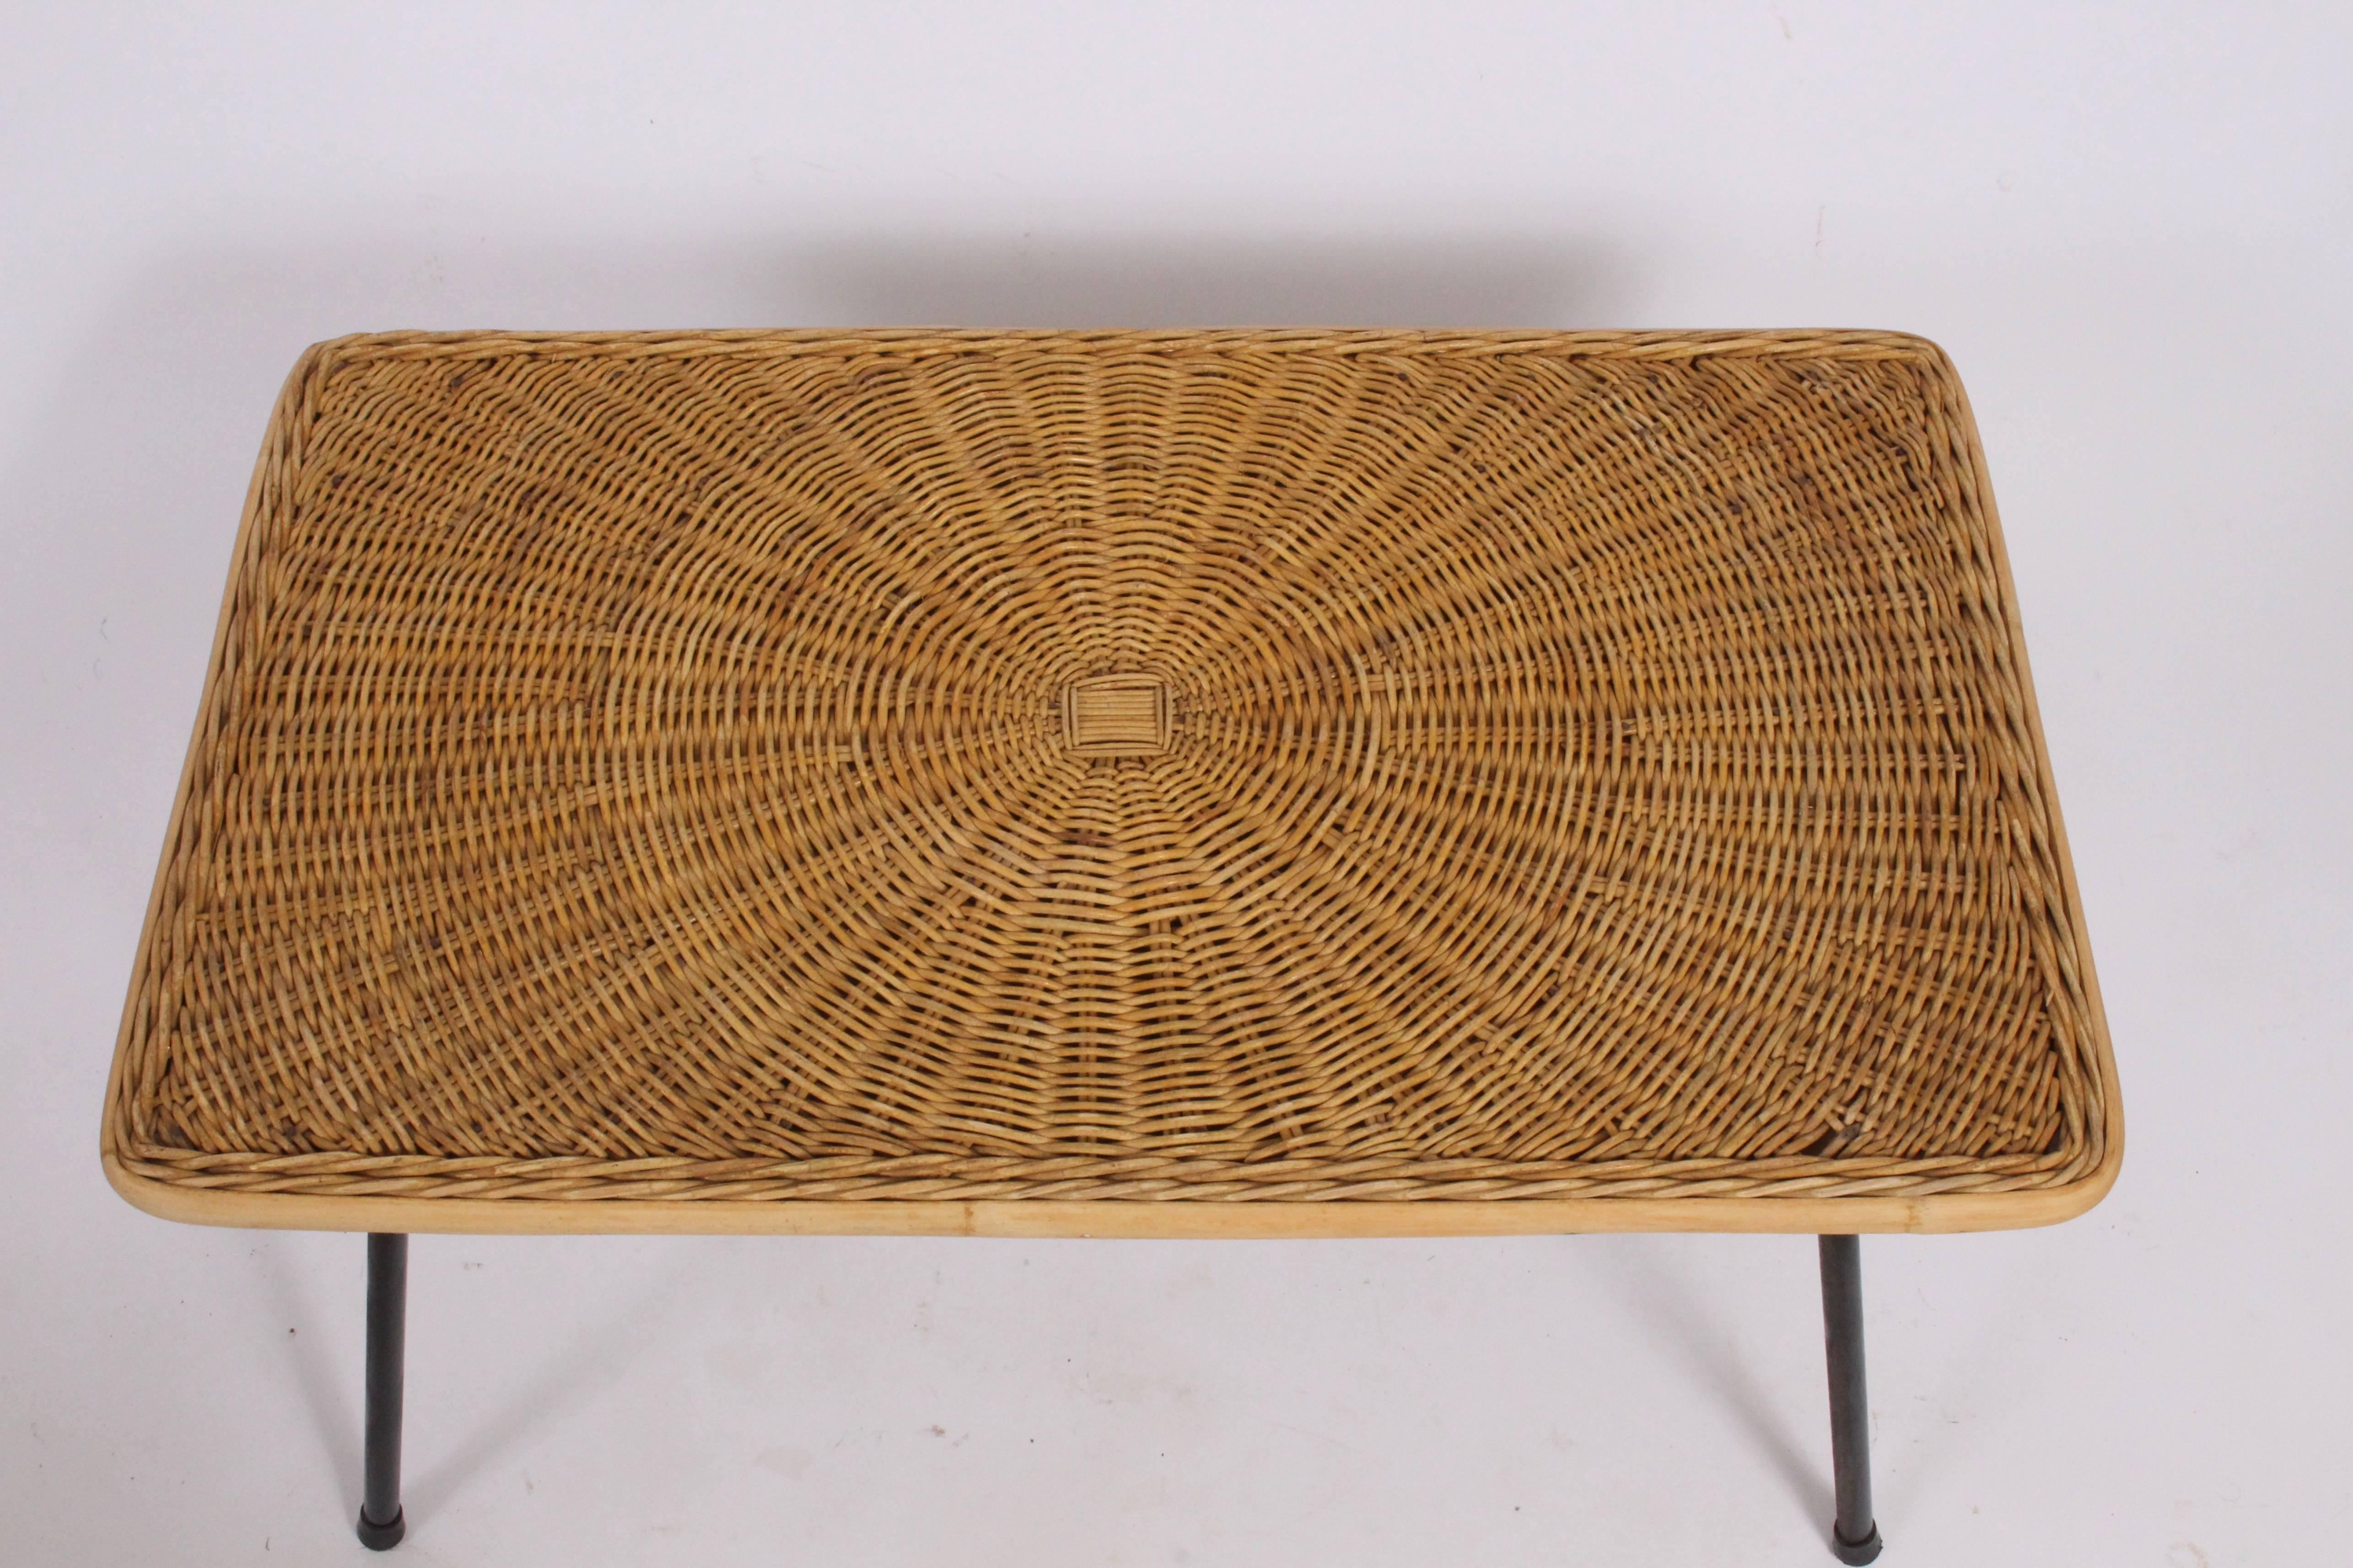 Arthur Umanoff for Raymor black wrought iron and woven wicker occasional table, 1950s. Rectangular woven wrapped surface with capped wrought iron legs. Classic Versatile. Fine design.  Available for professionally packaged parcel delivery, please